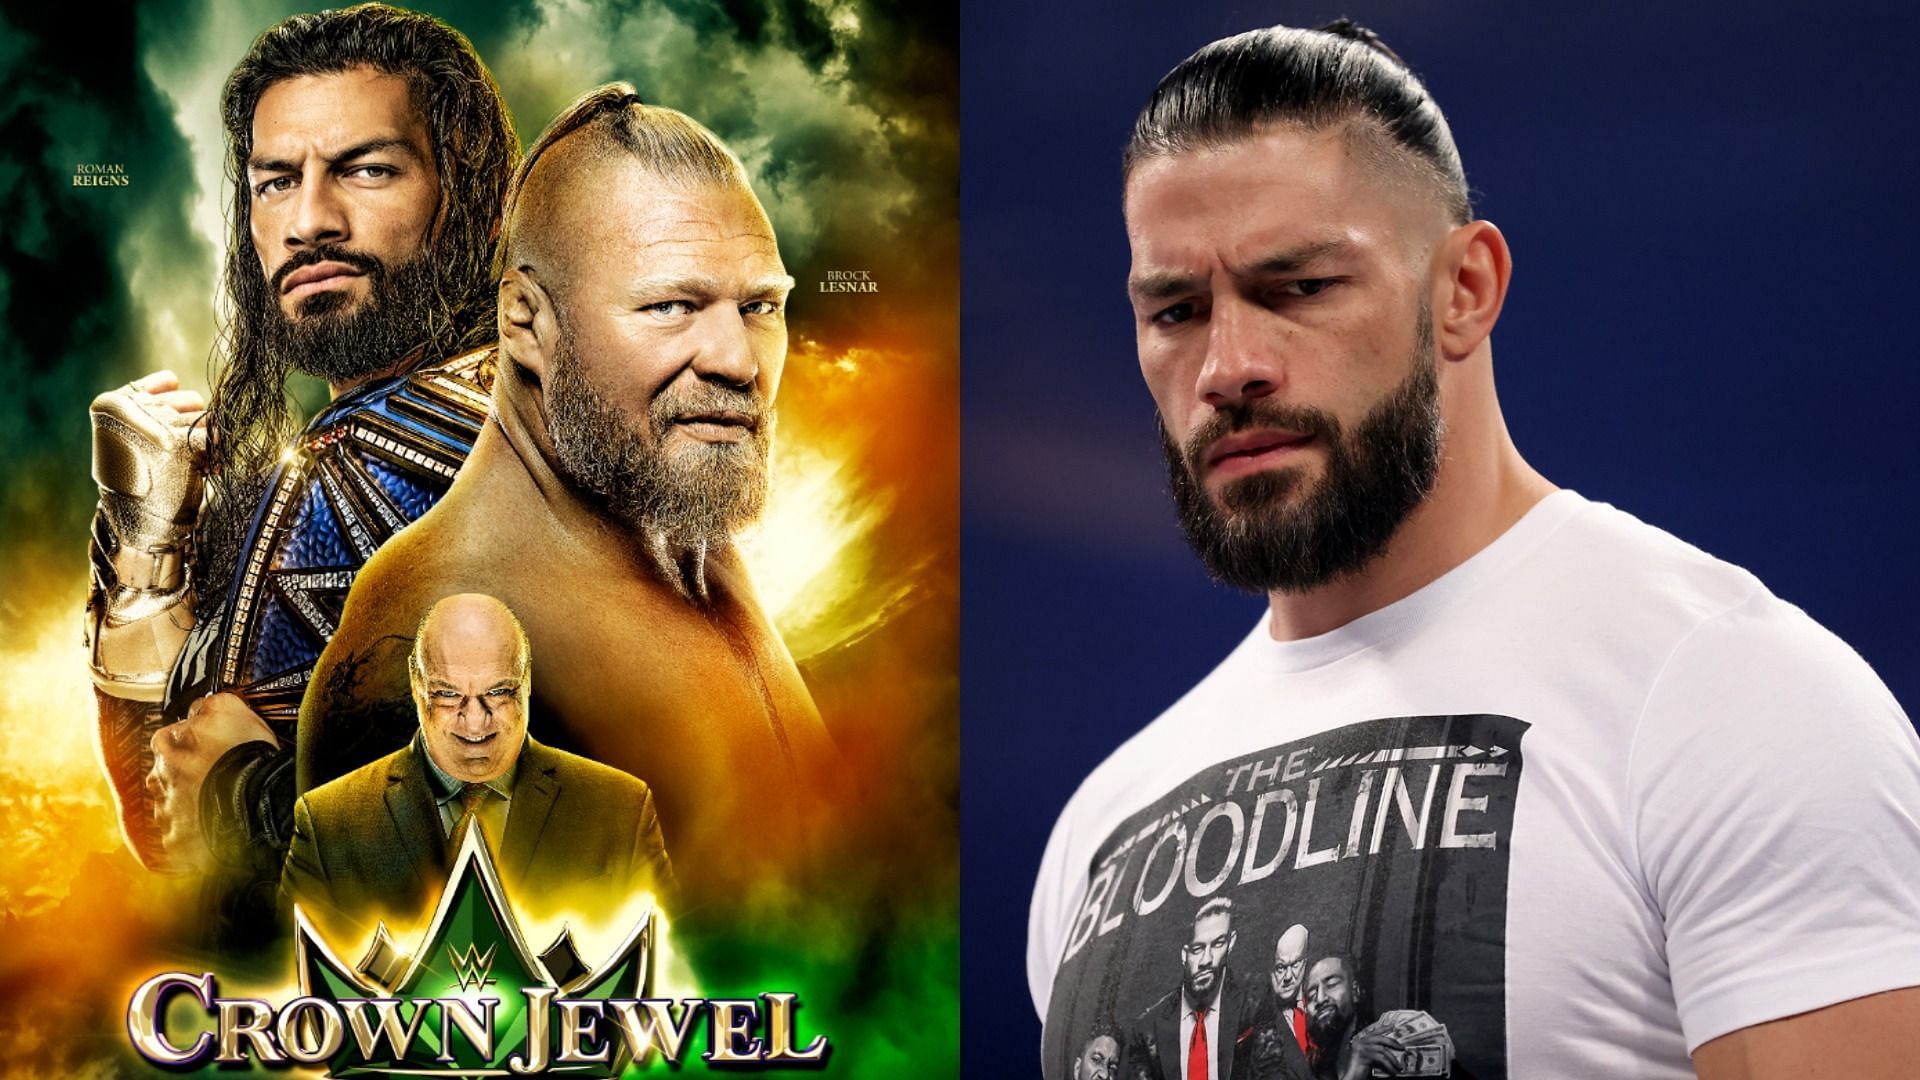 Roman Reigns will go one-on-one against Brock Lesnar at WWE Crown Jewel 2021